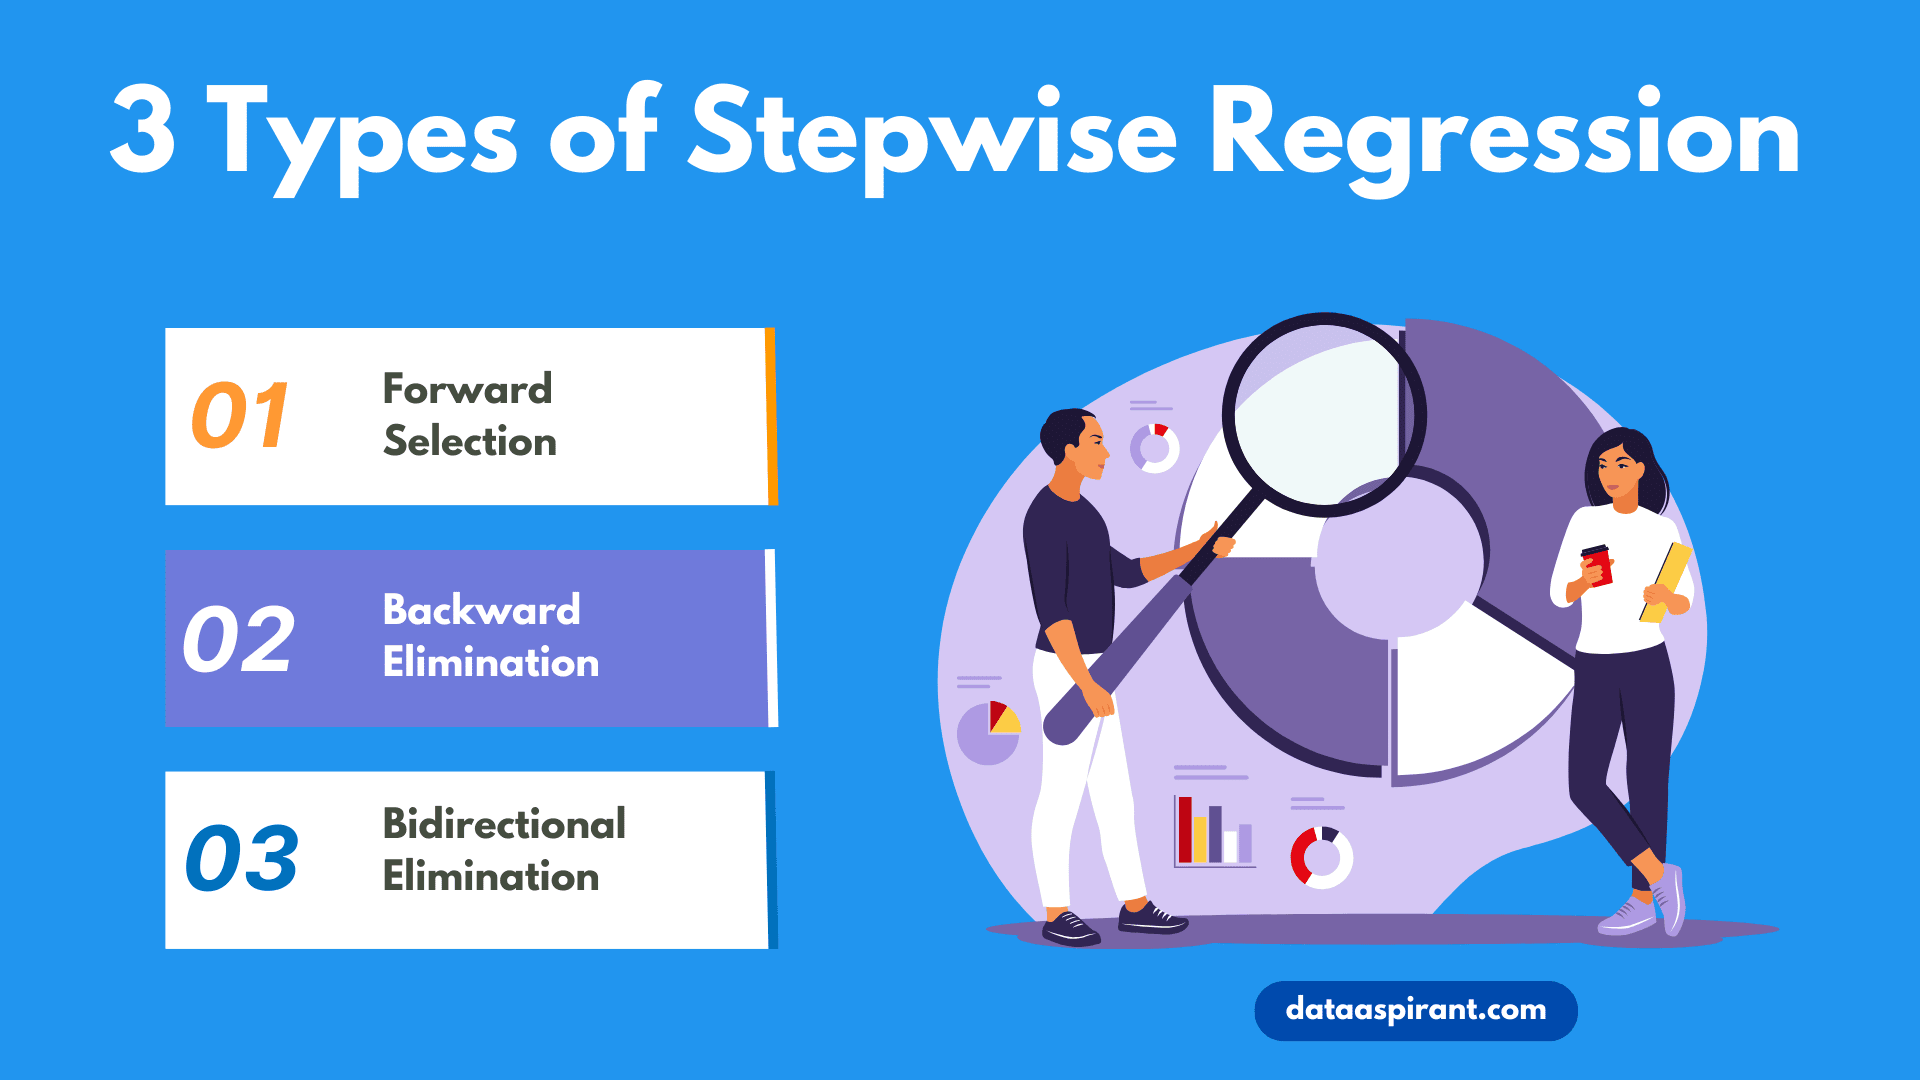 What is Stepwise Regression?